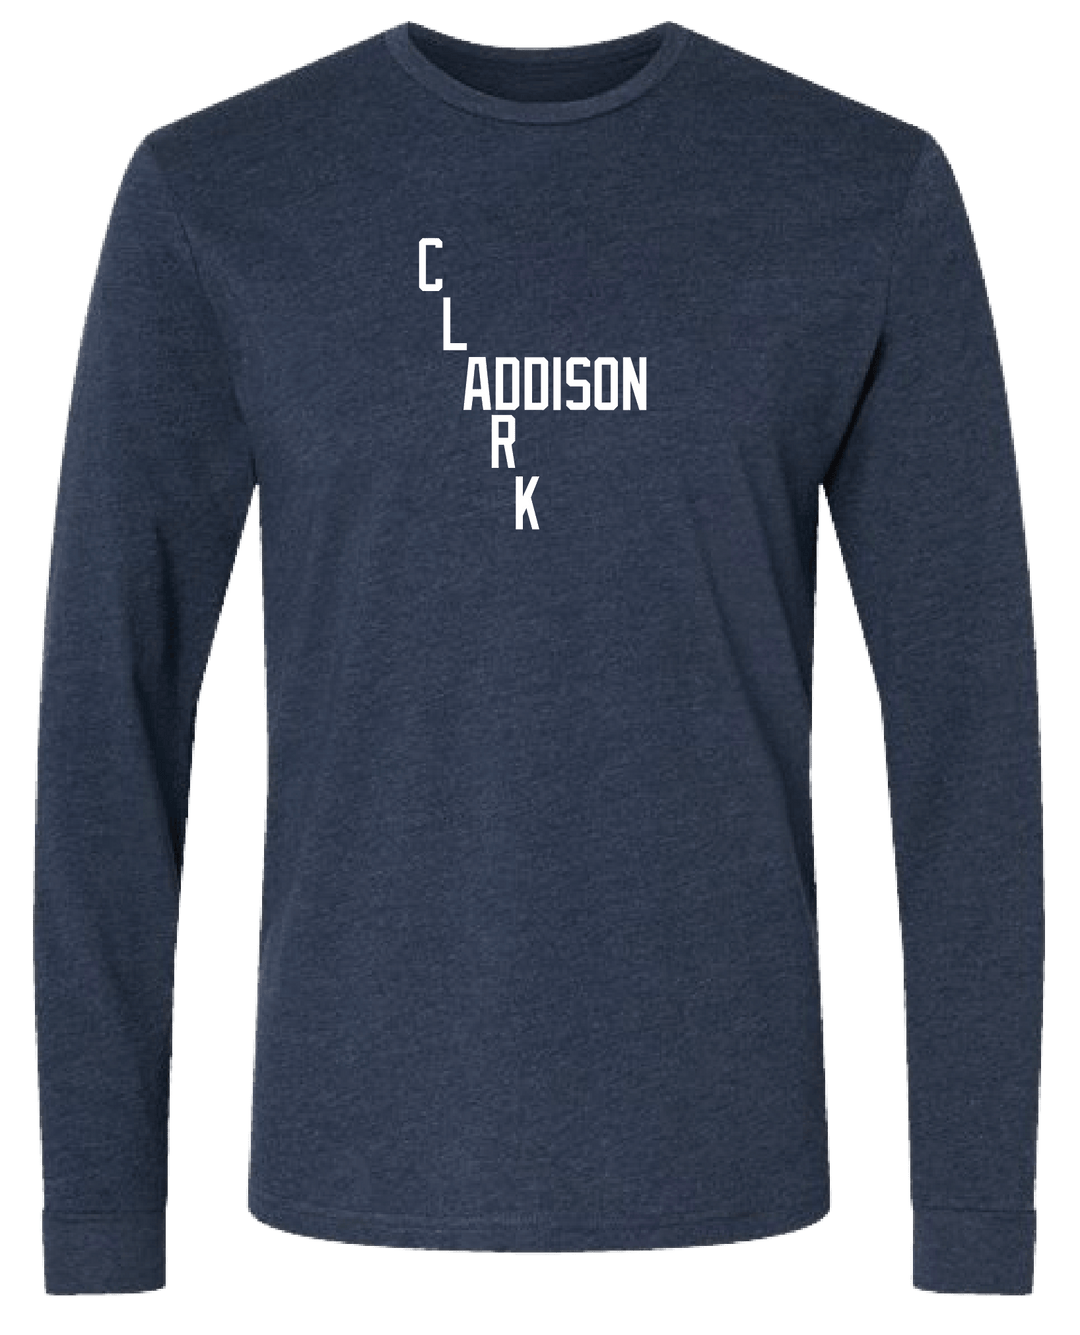 CLARK AND ADDISON (LONG SLEEVE) - OBVIOUS SHIRTS